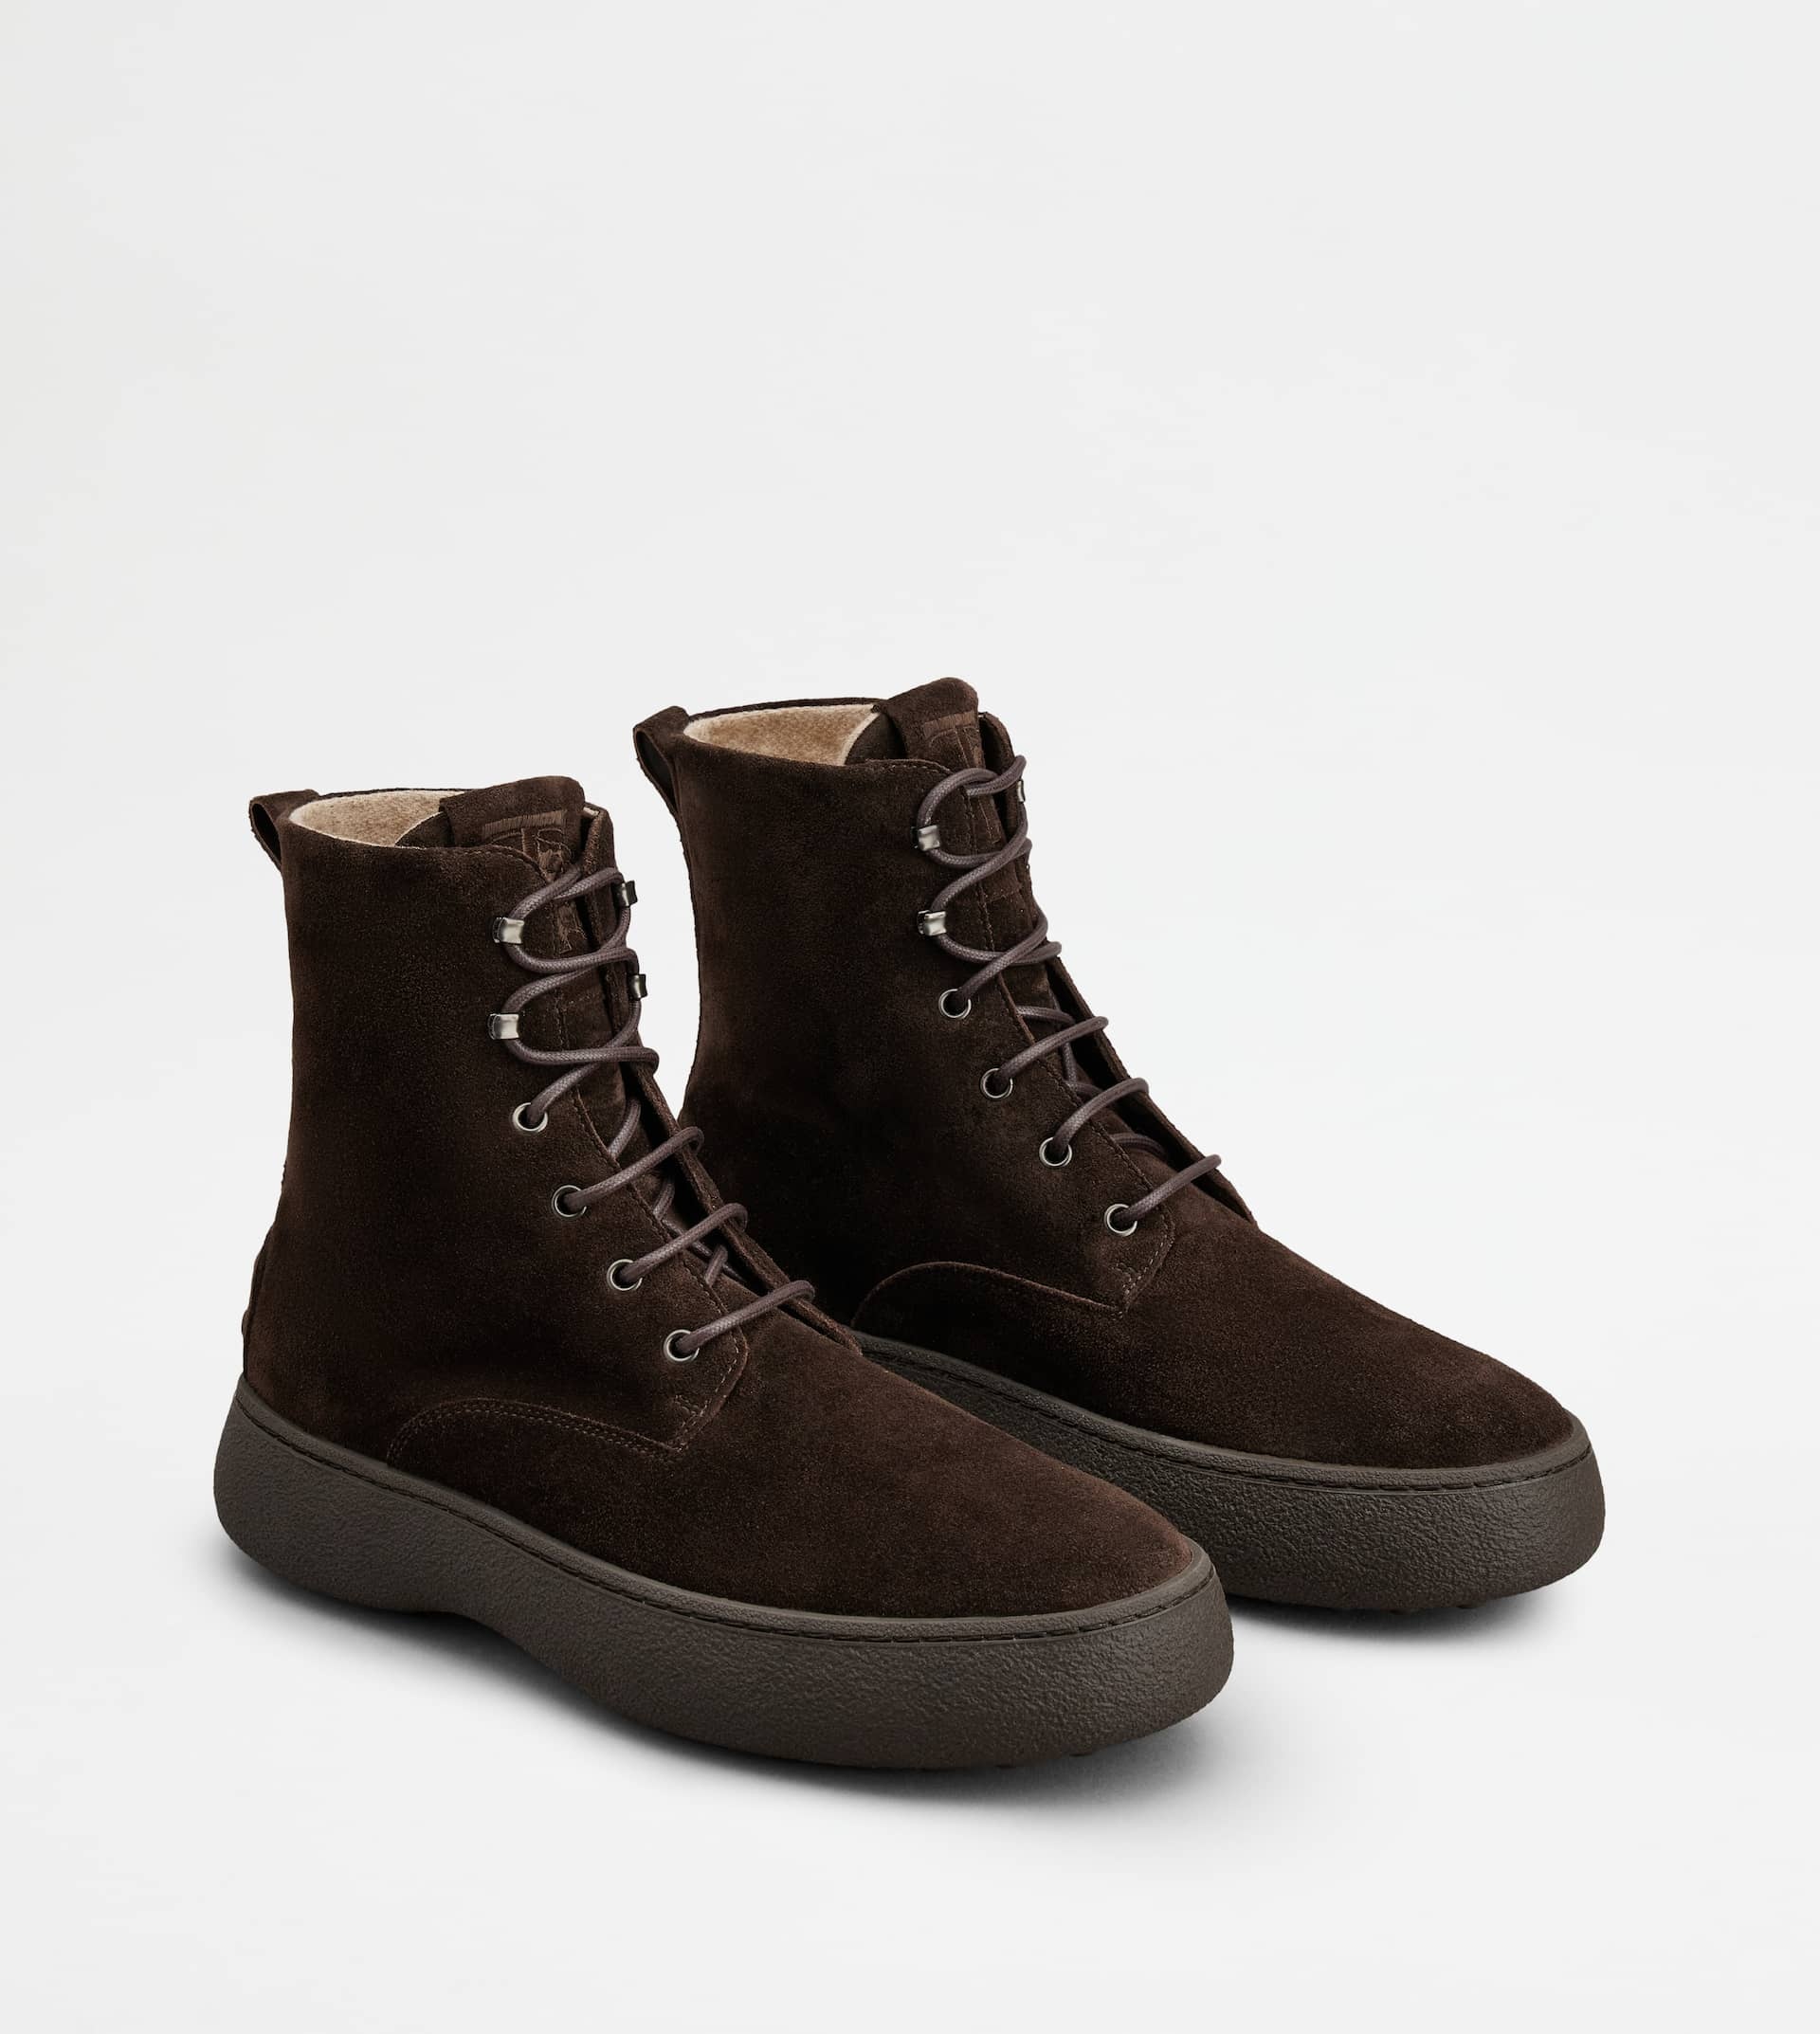 TOD'S W. G. LACE-UP ANKLE BOOTS IN SUEDE - BROWN - 3